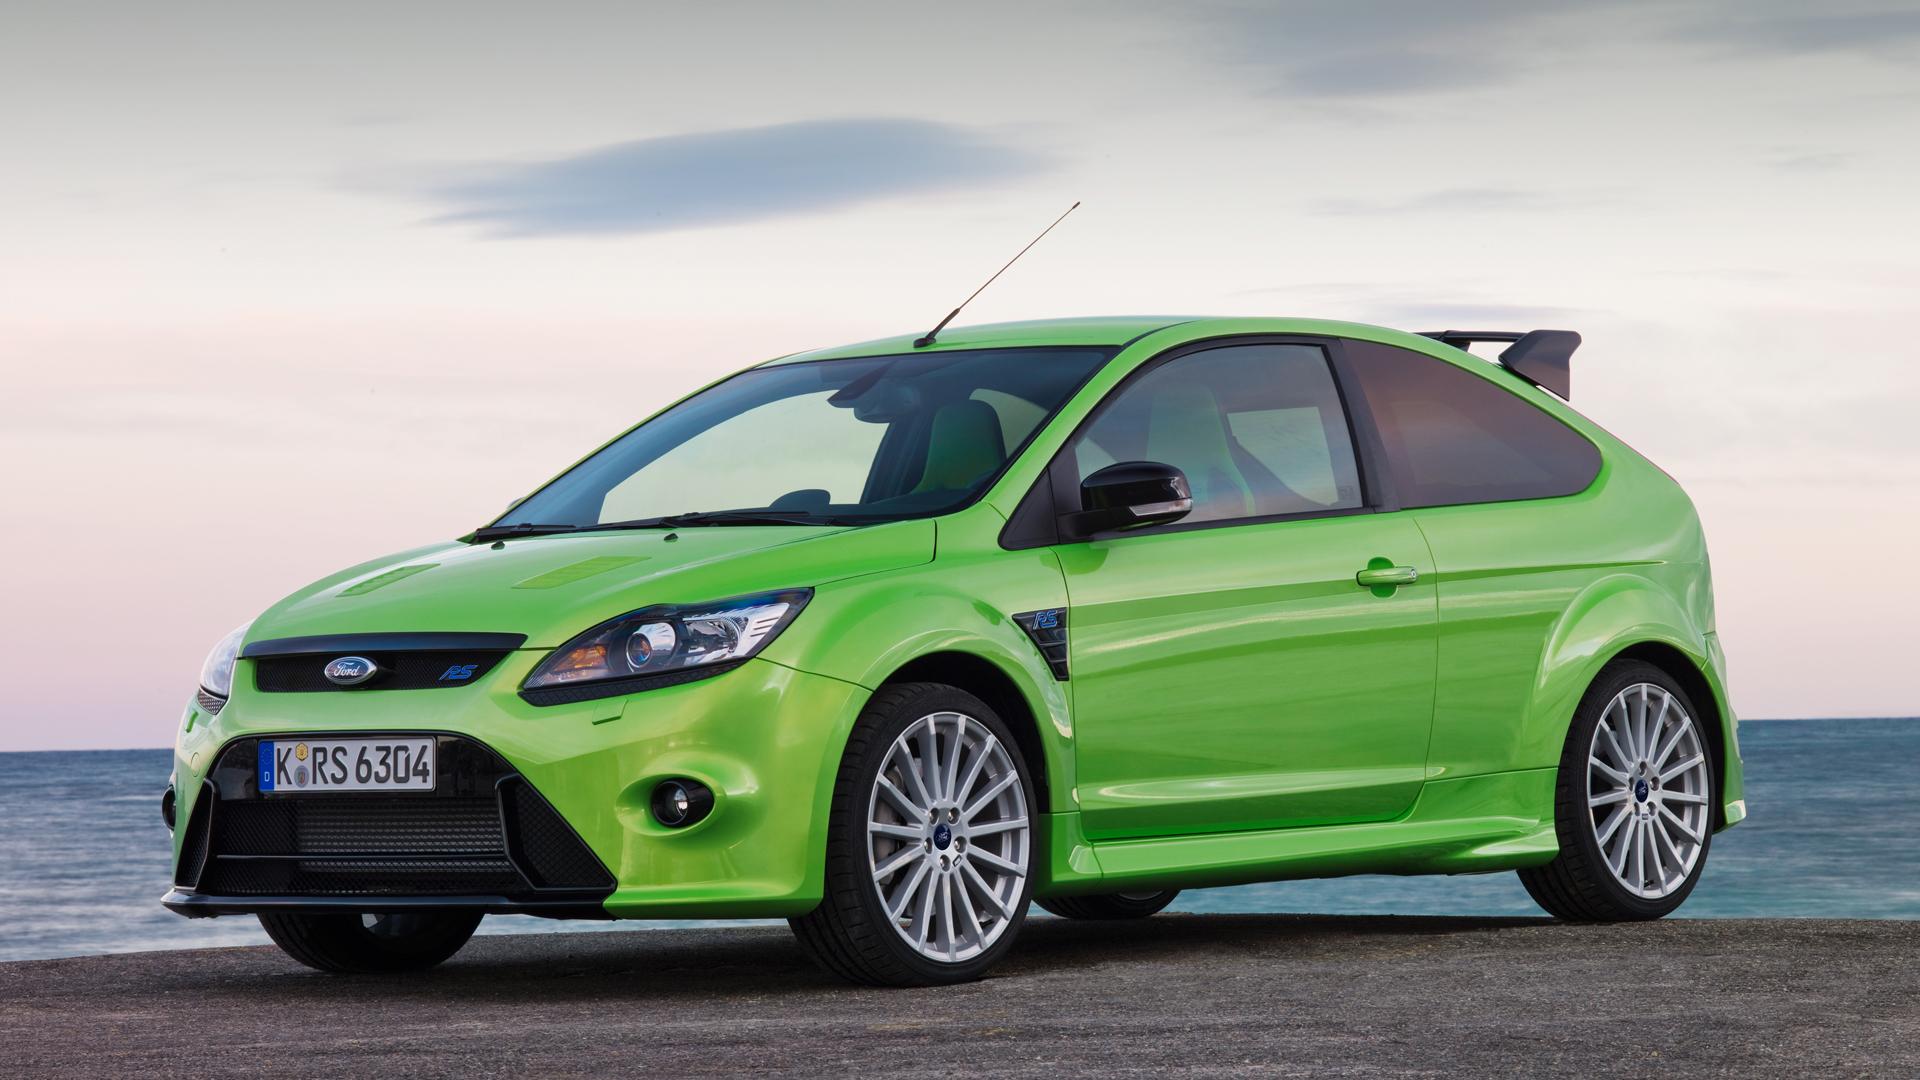 2017 Ford Focus Rs Performance Parts 4k Wallpaper Hd Car Wallpapers Id 9227